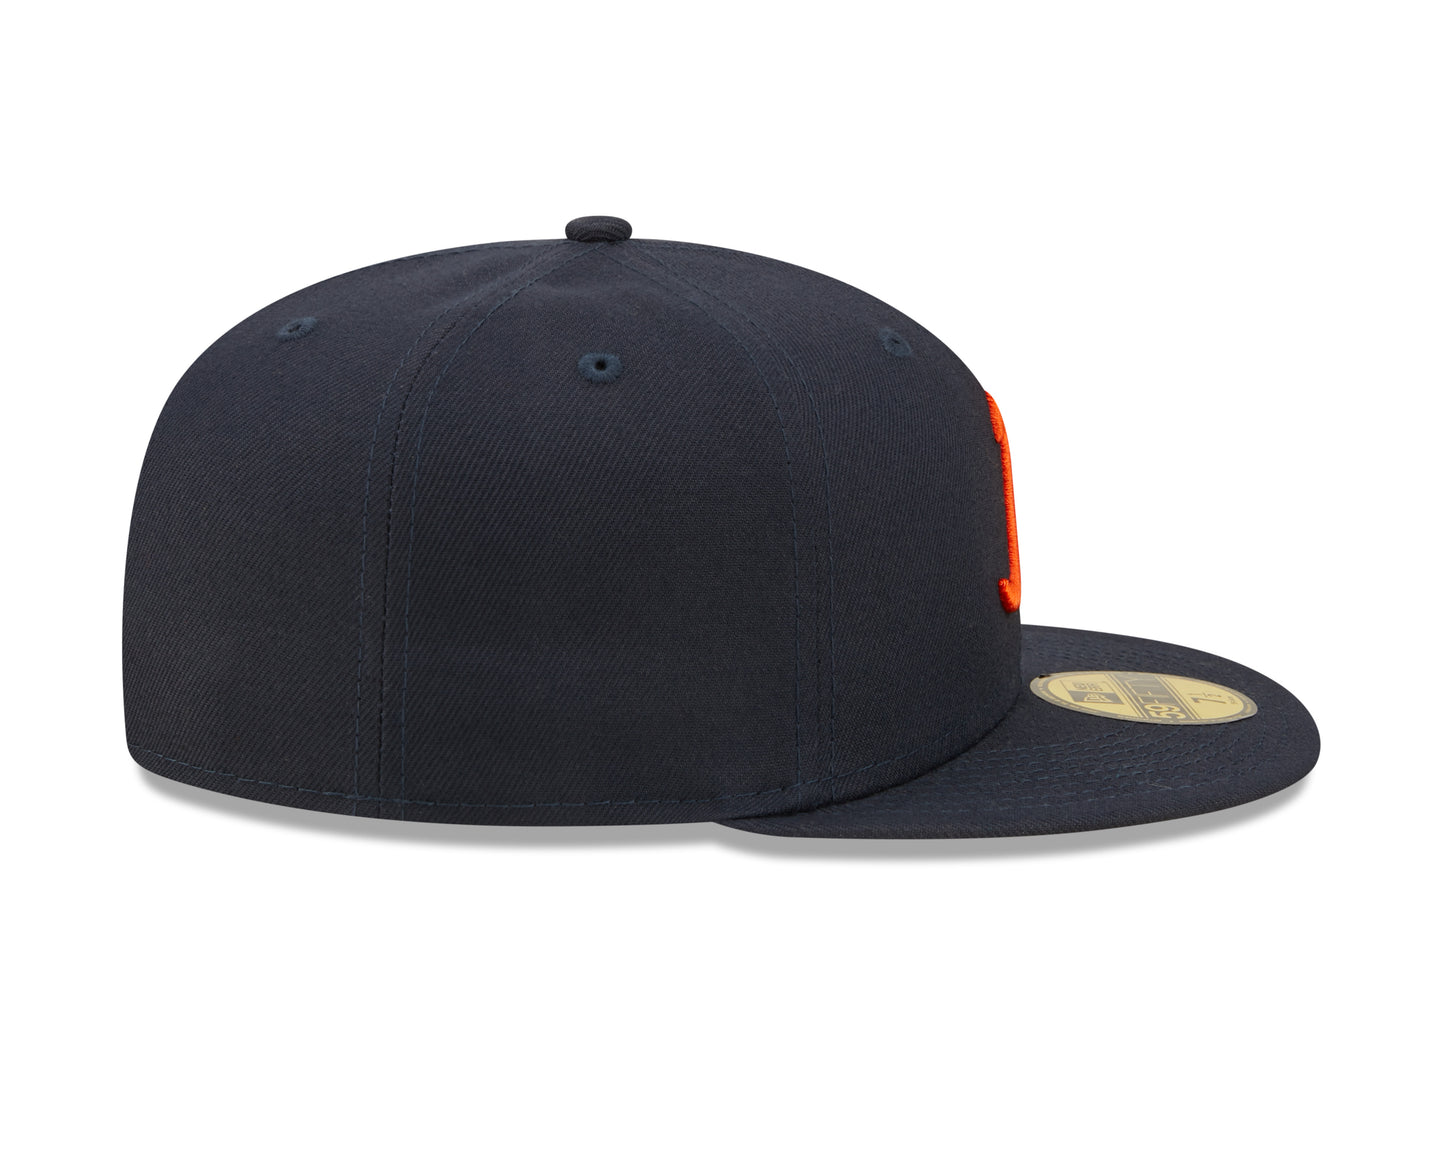 Chicago Bears "B" Logo Nightshift Navy New Era 59FIFTY Fitted Hat